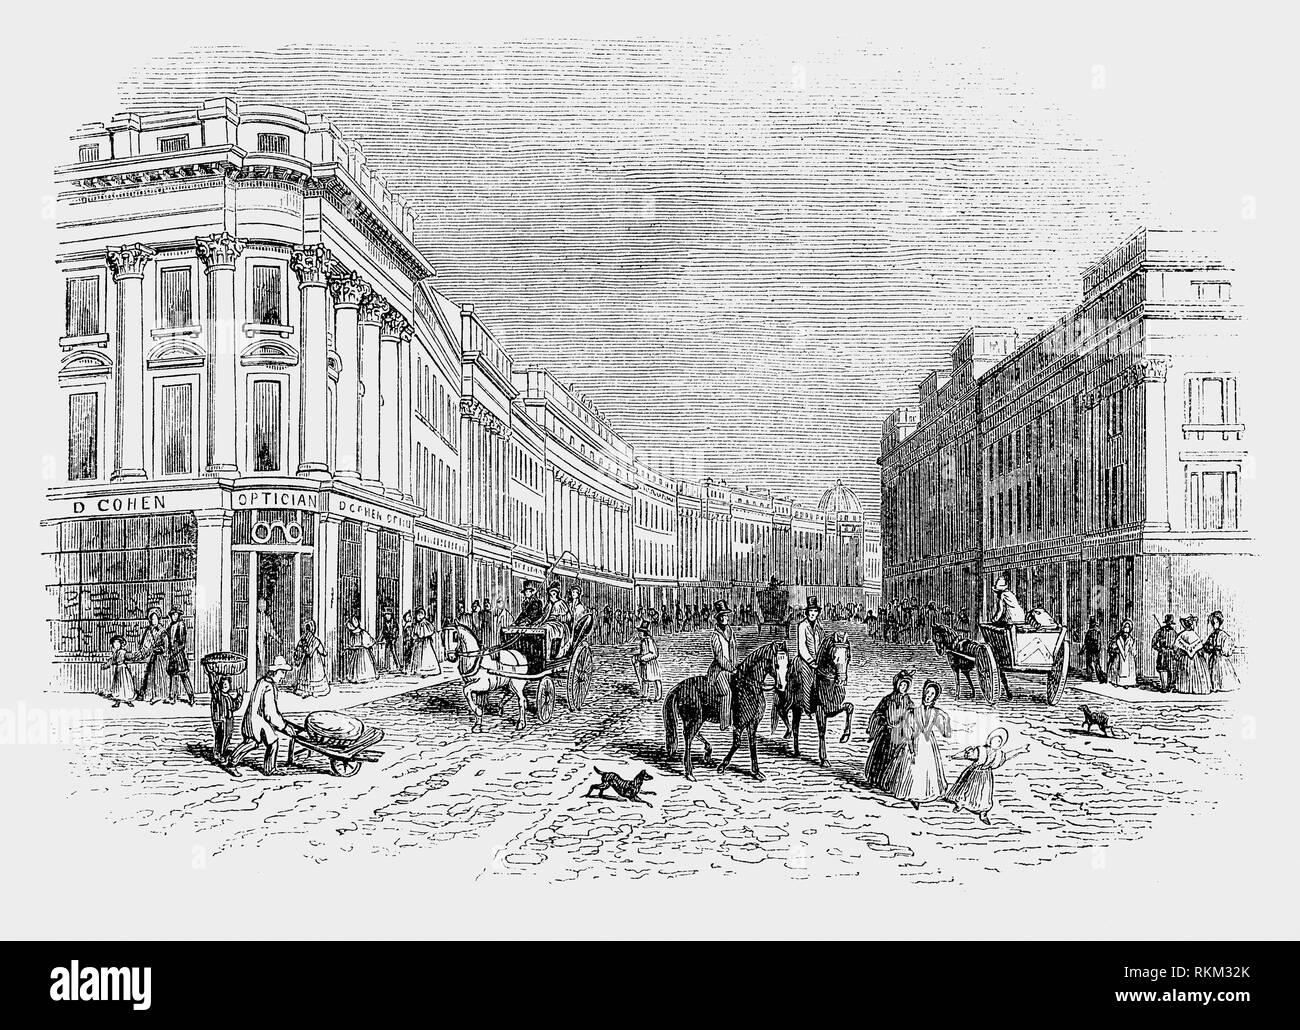 In the years 1825-1840 the centre of Newcastle-upon-Tyne, England was  rebuilt. This was mostly the work of three men, John Dobson, an architect,  Richard Grainger, a builder and John Clayton the town